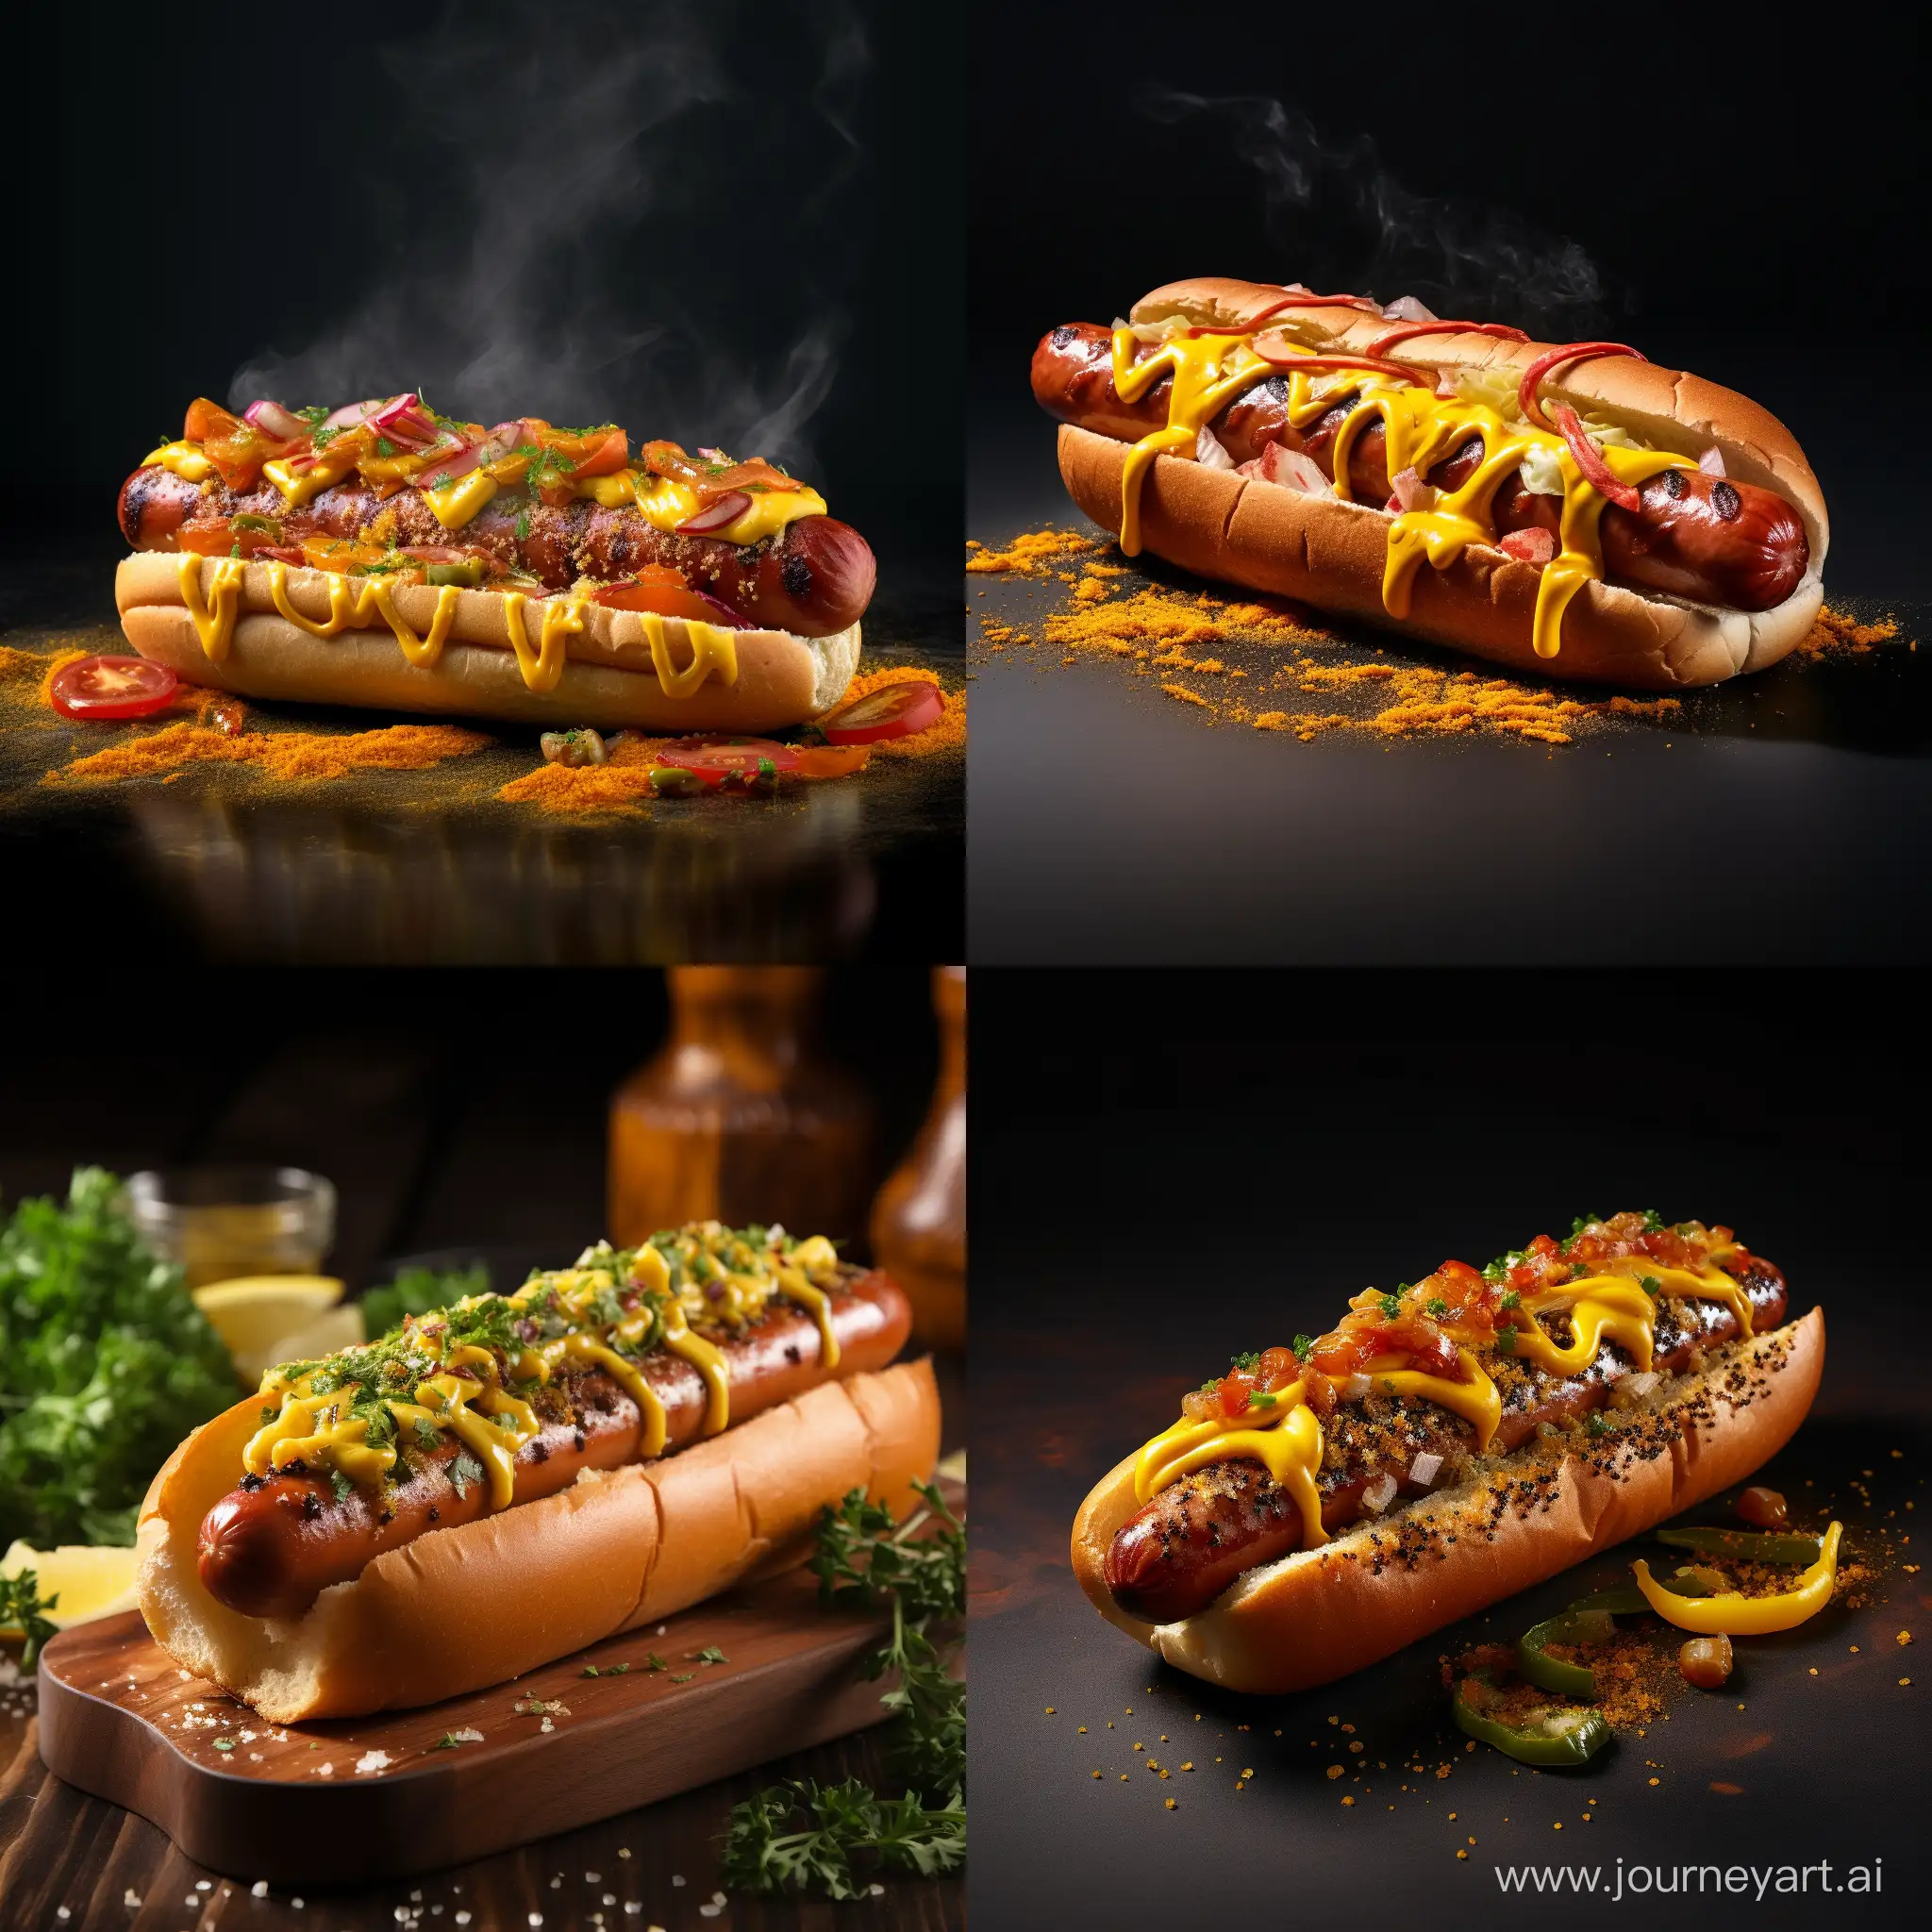 Delicious-Grilled-Sausage-Hot-Dog-with-Mustard-Side-View